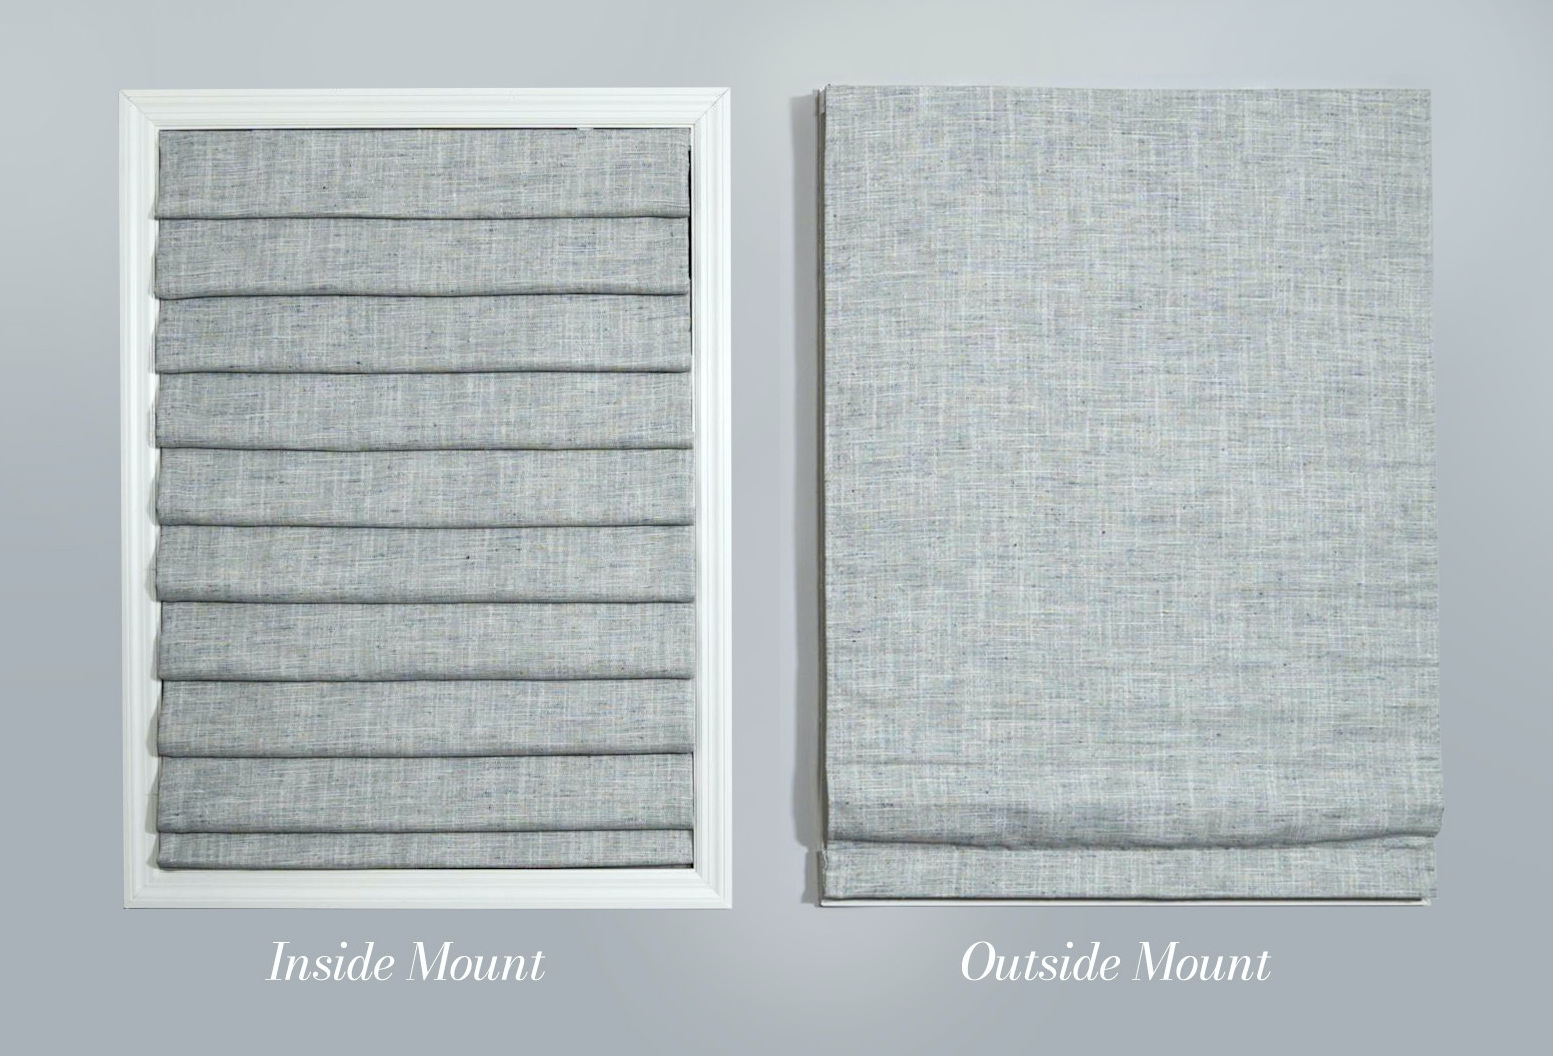 Side-by-side images of an inside mount window and an outside mount window.